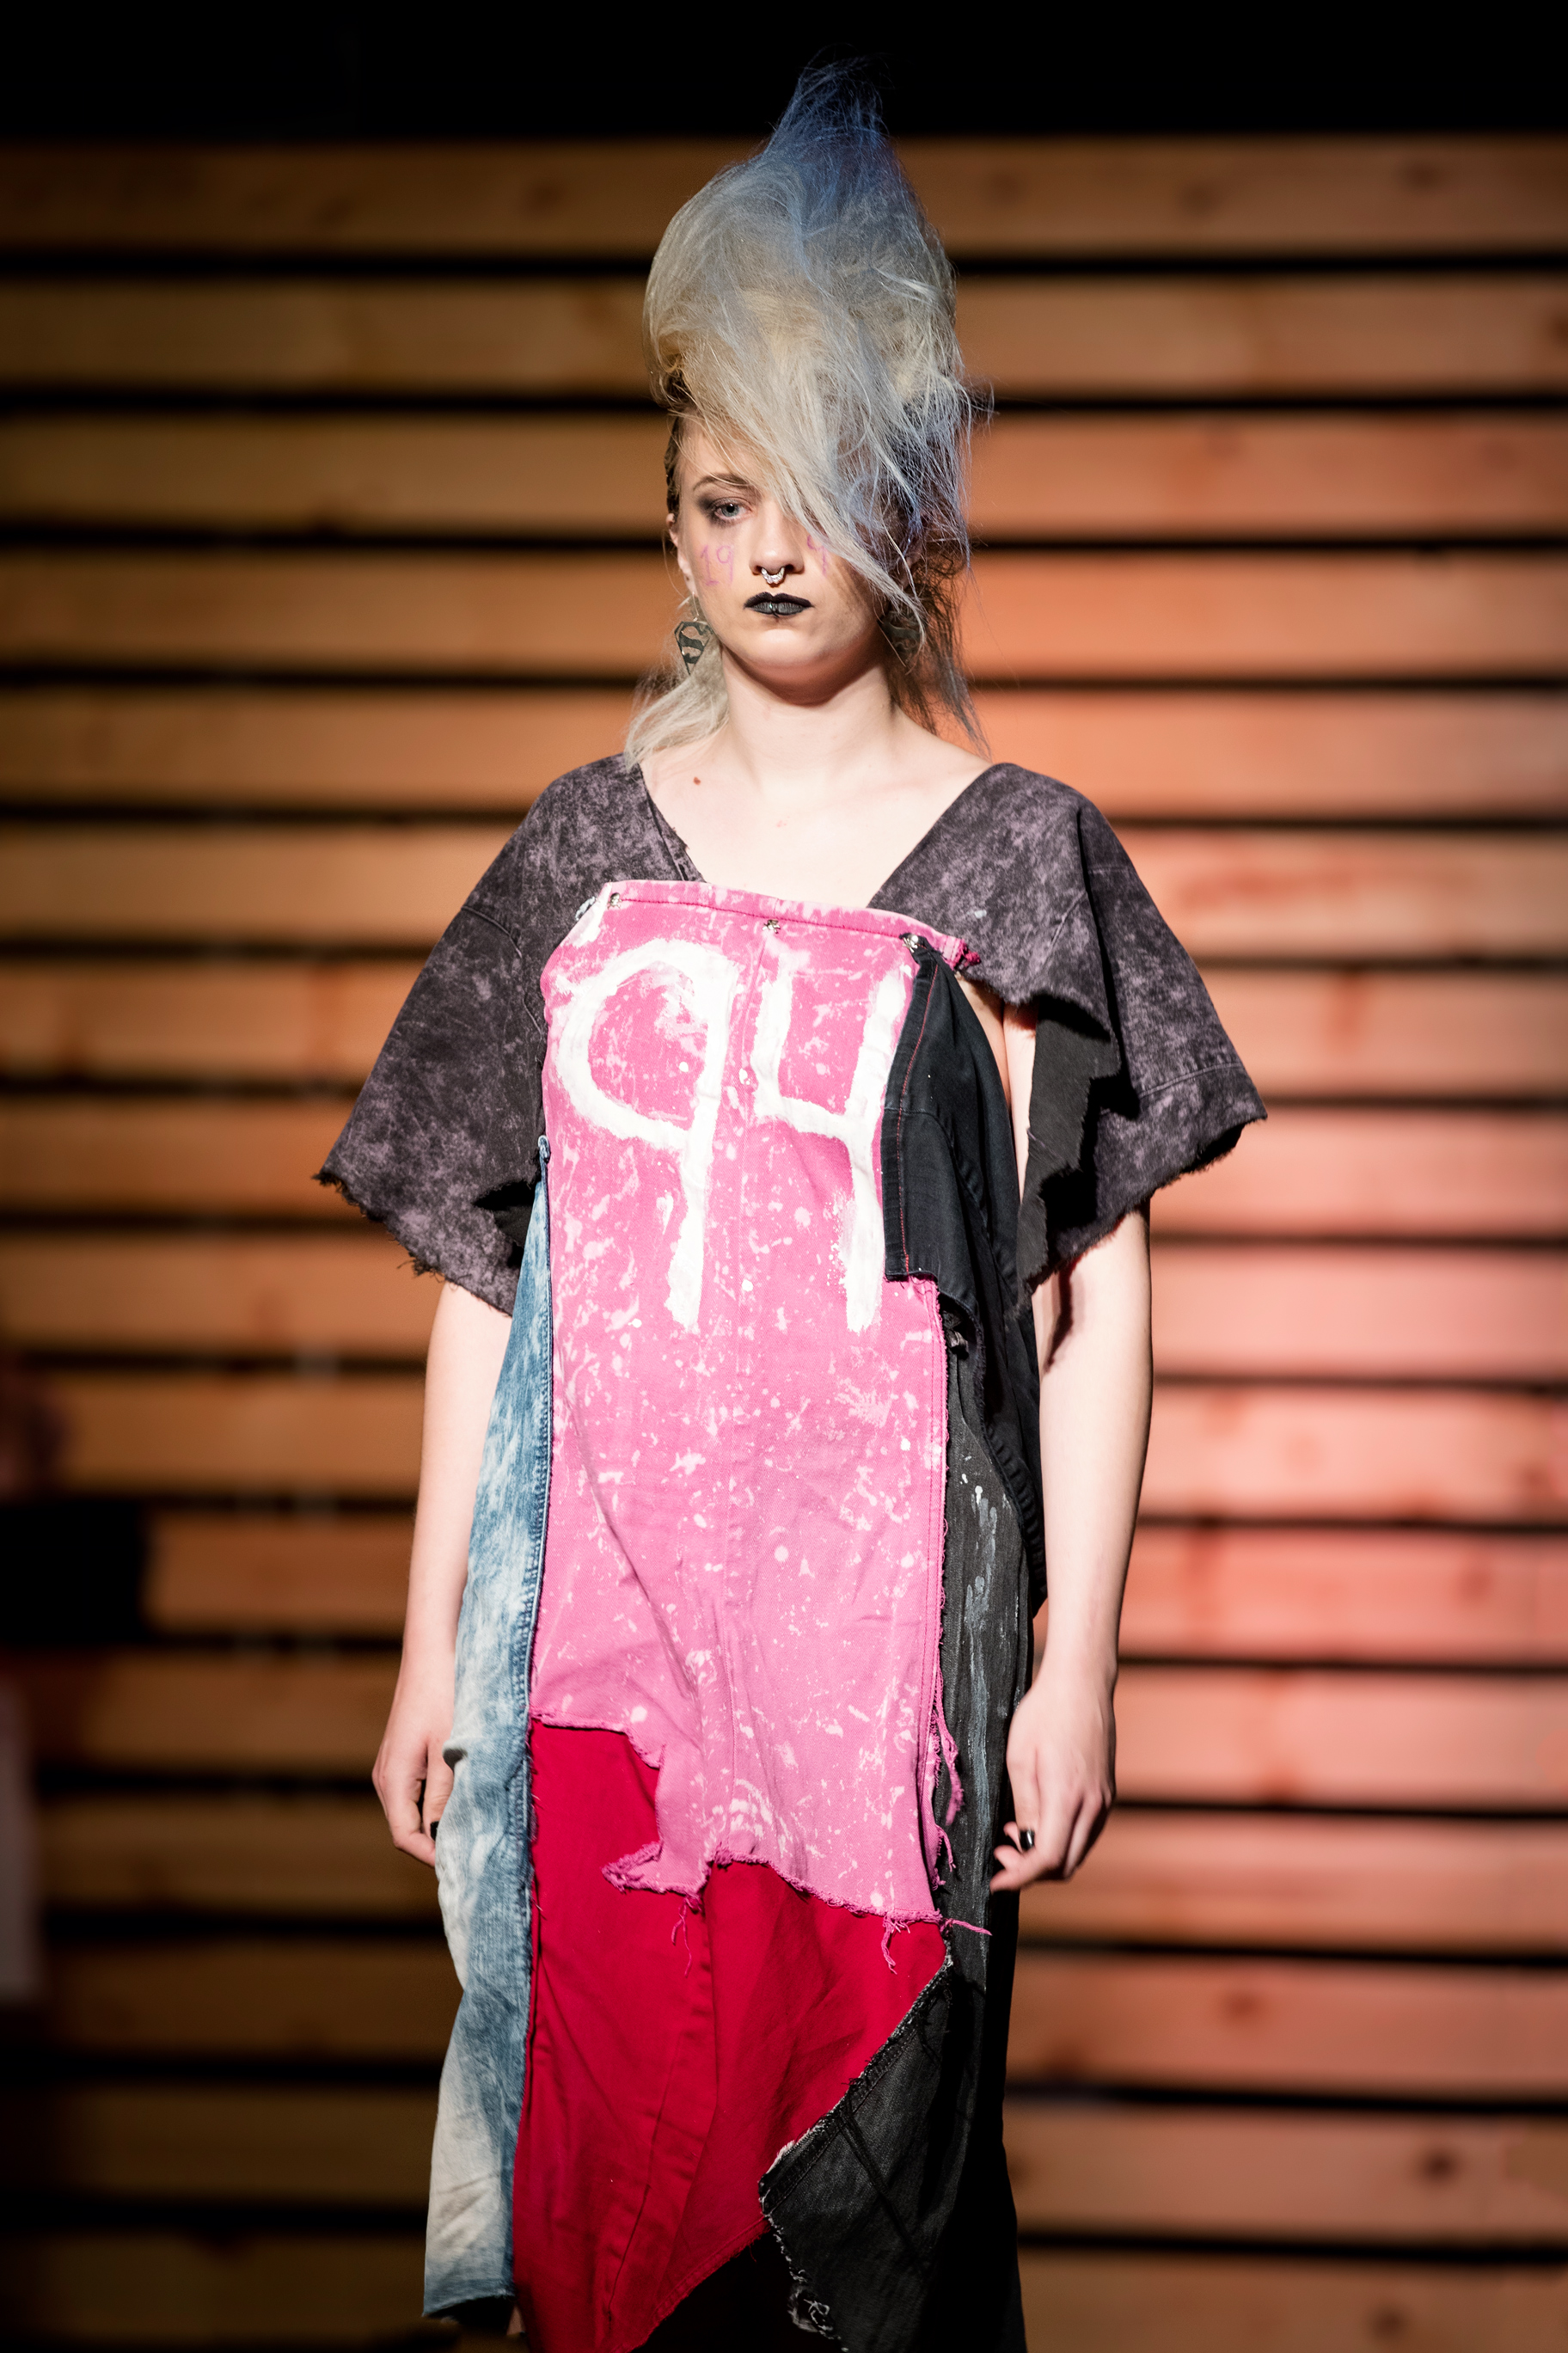 Mission Wear Upcycled Patchwork Fashion Show - 078.jpg